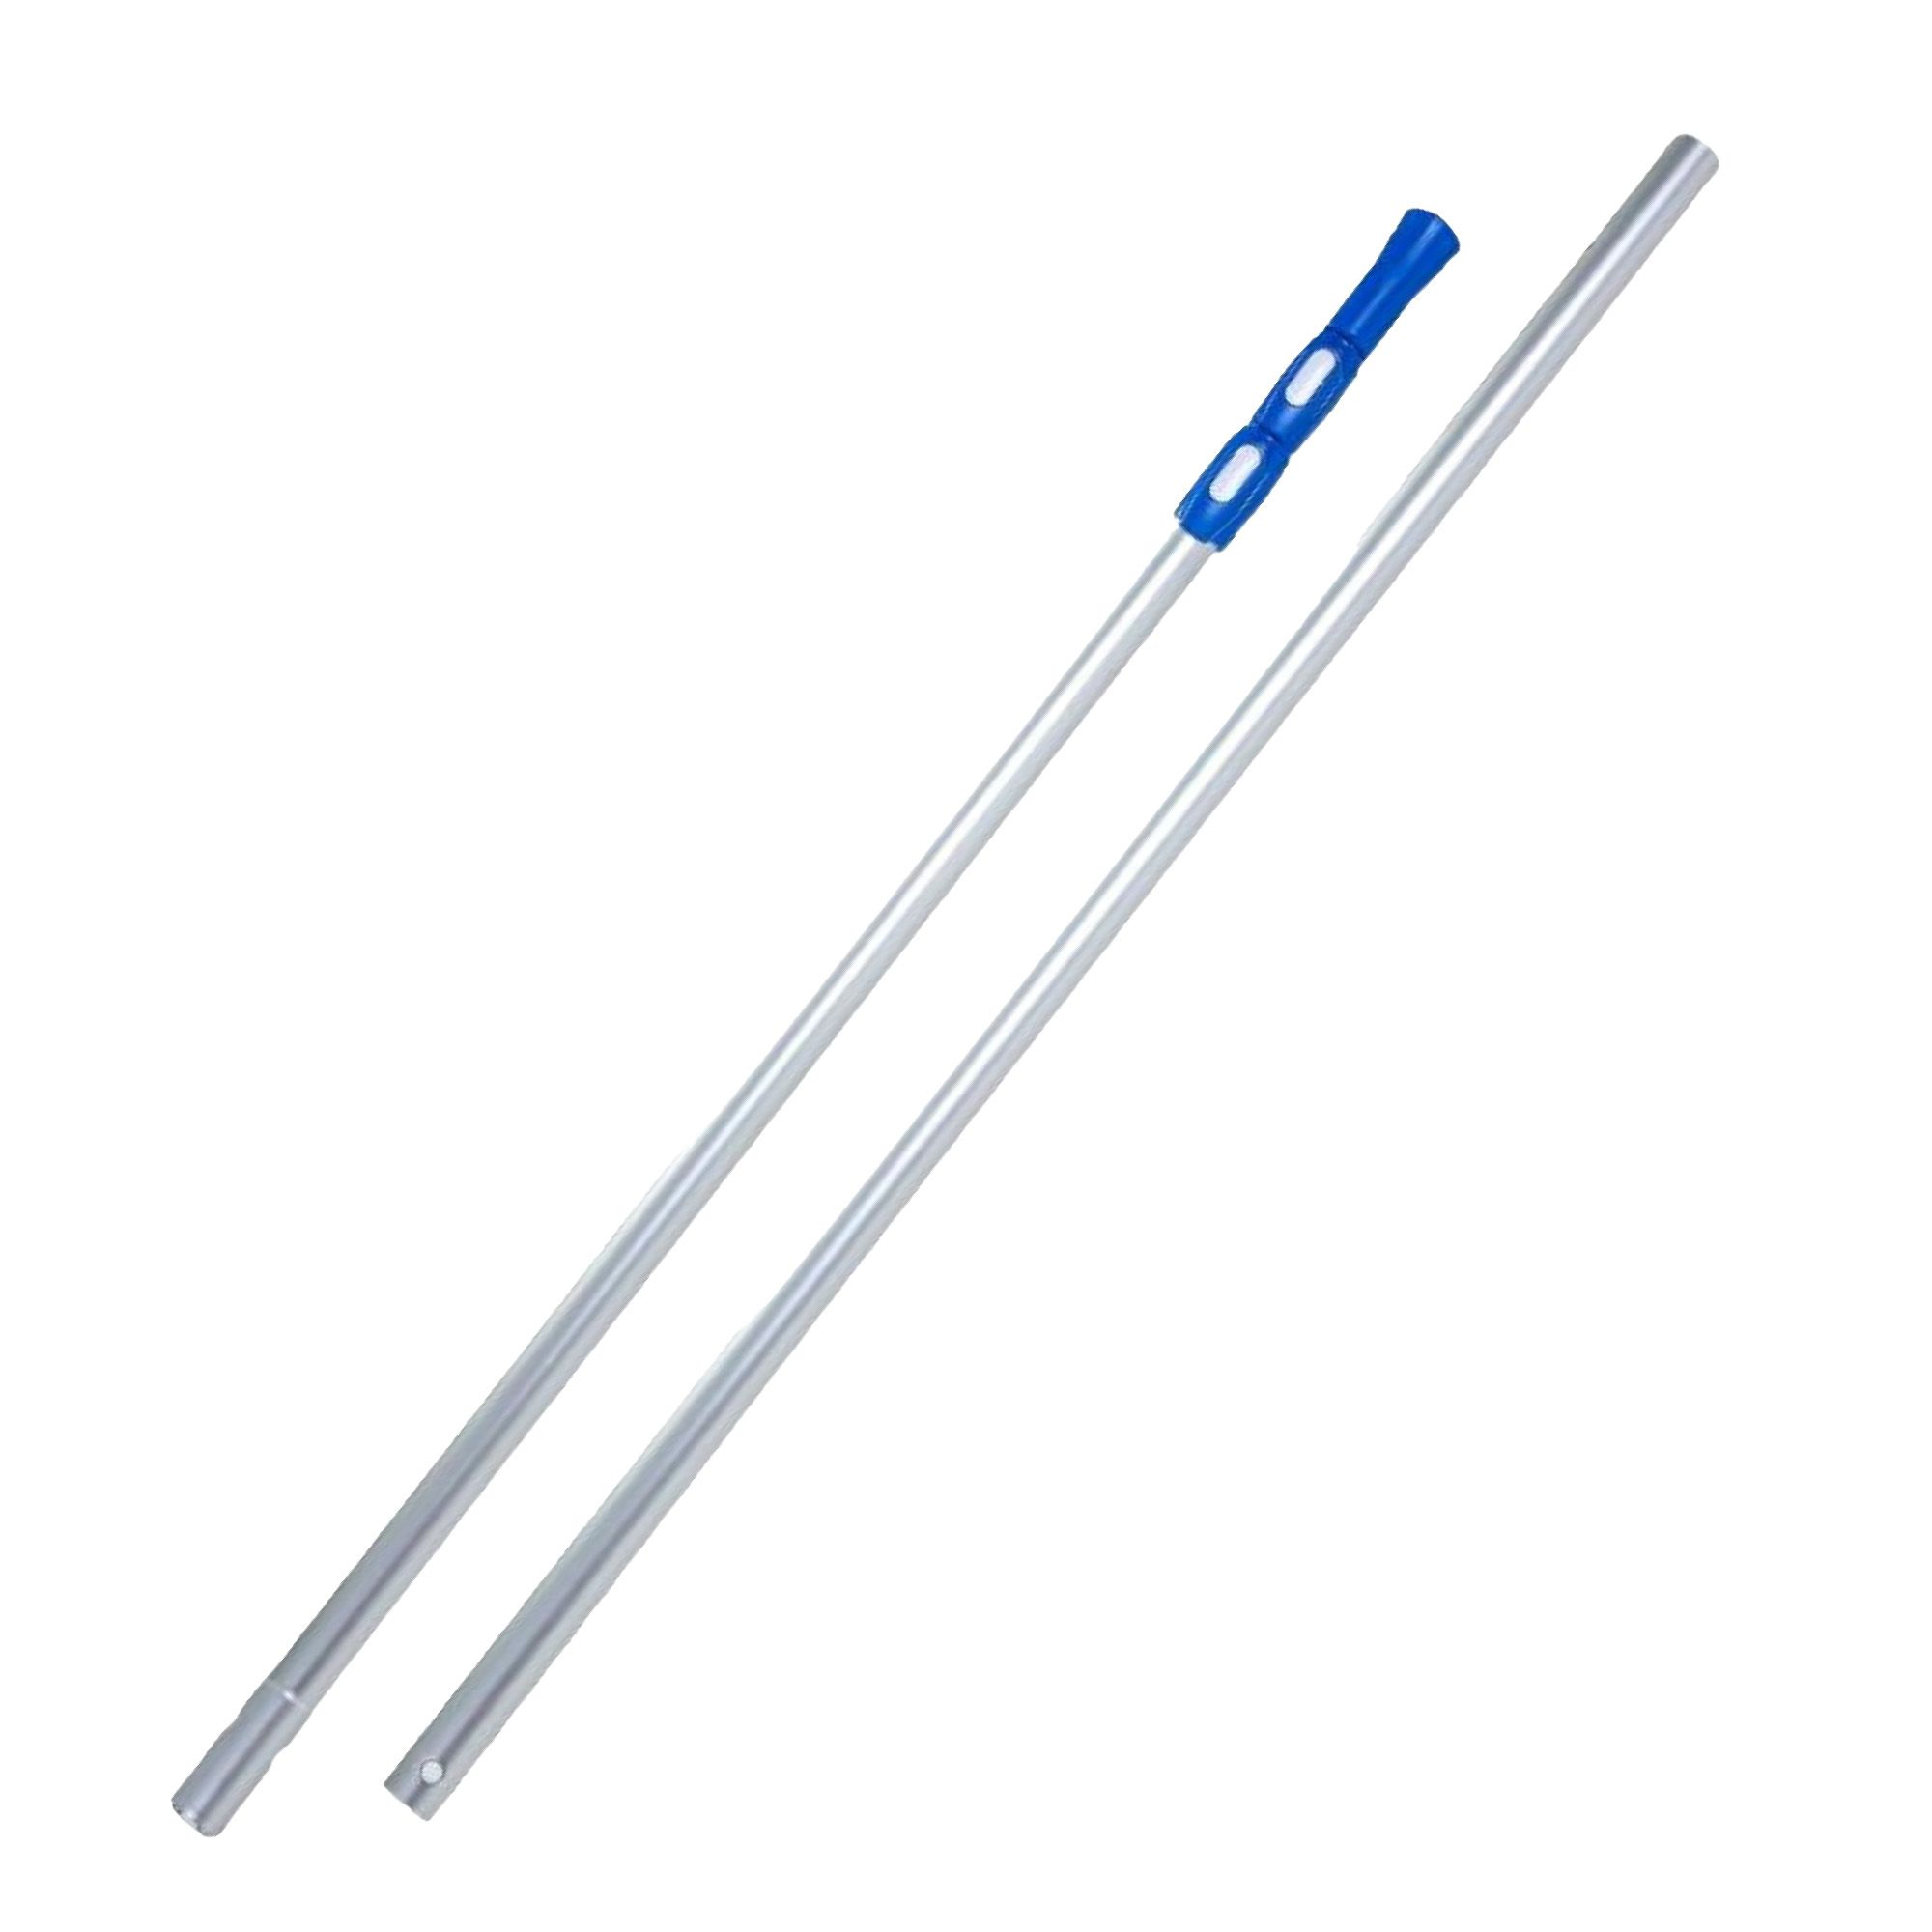 3 sections telescopic pole